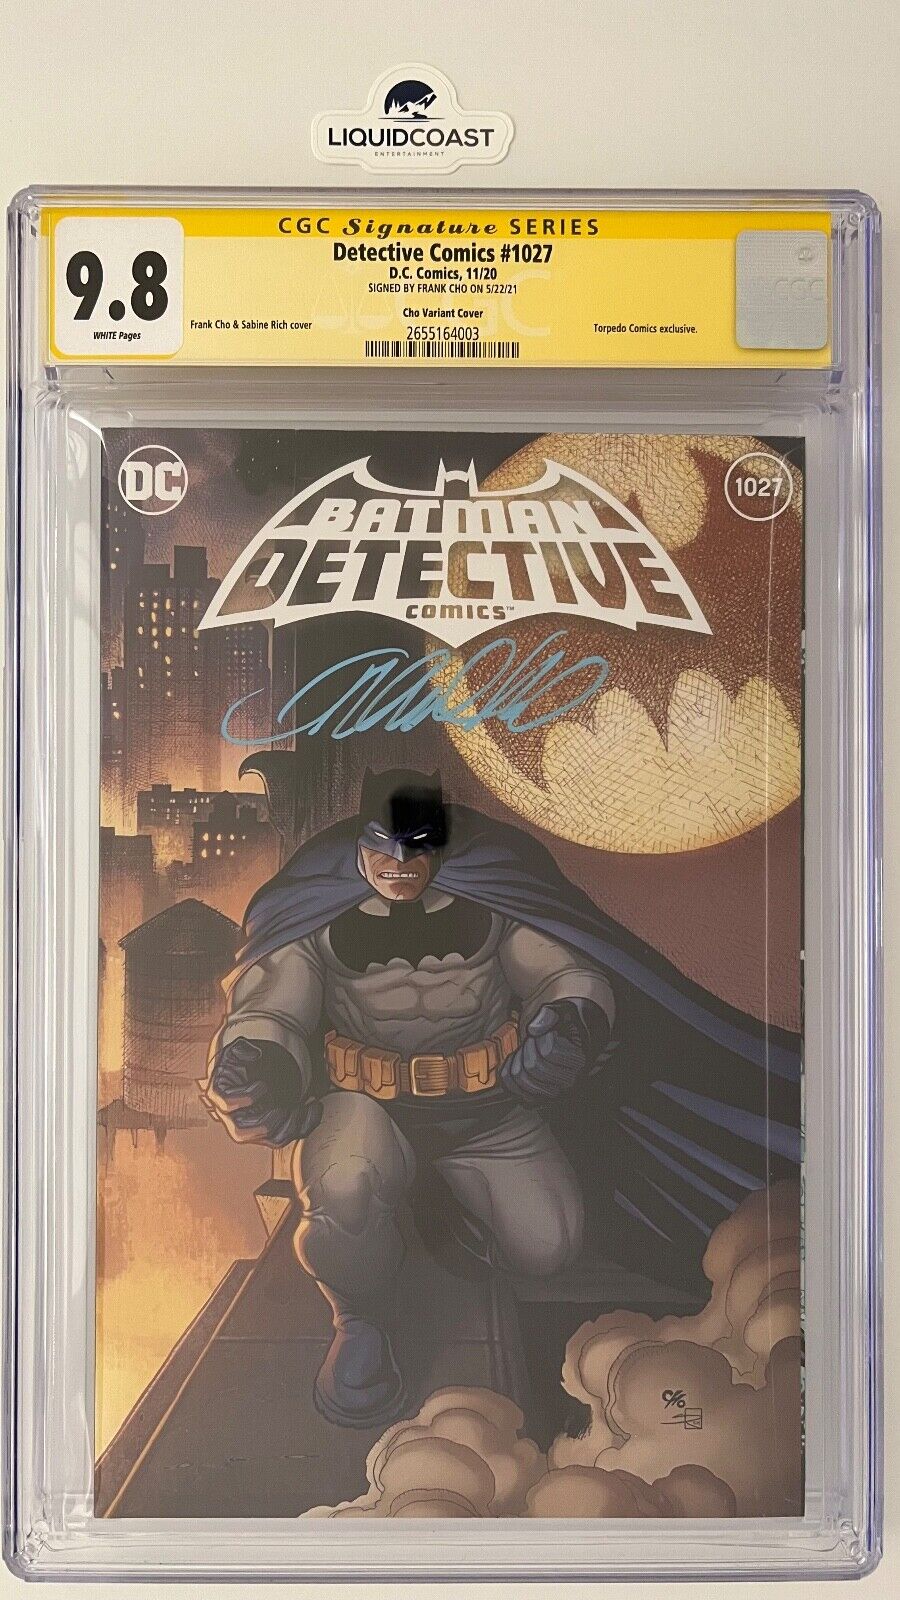 Detective Comics #1027 SS CGC 9.8 signed by Frank Cho Variant Cover